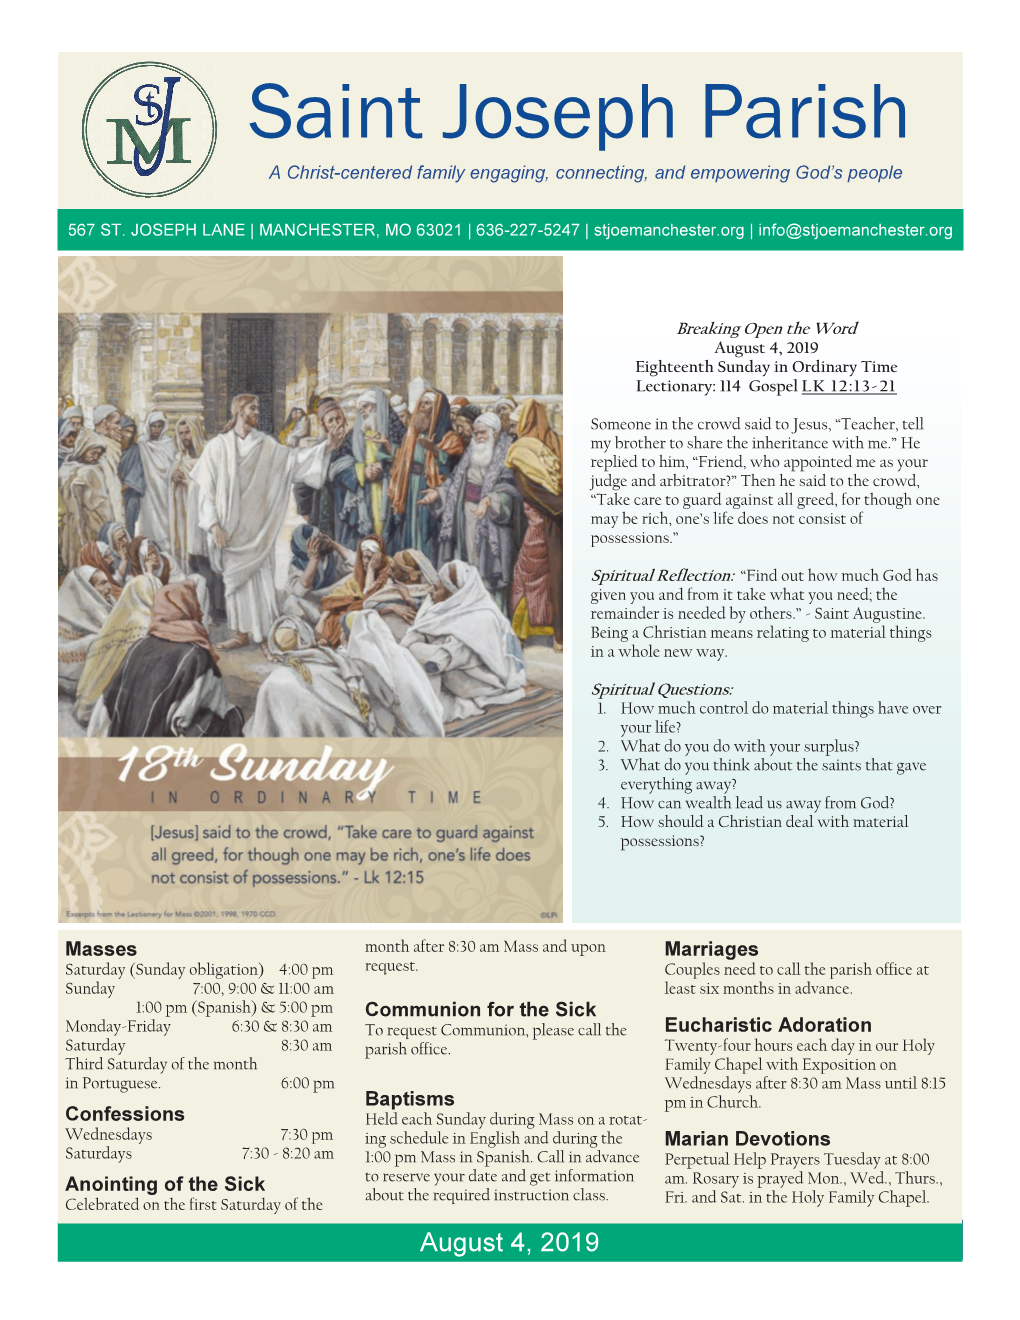 Saint Joseph Parish a Christ-Centered Family Engaging, Connecting, and Empowering God’S People